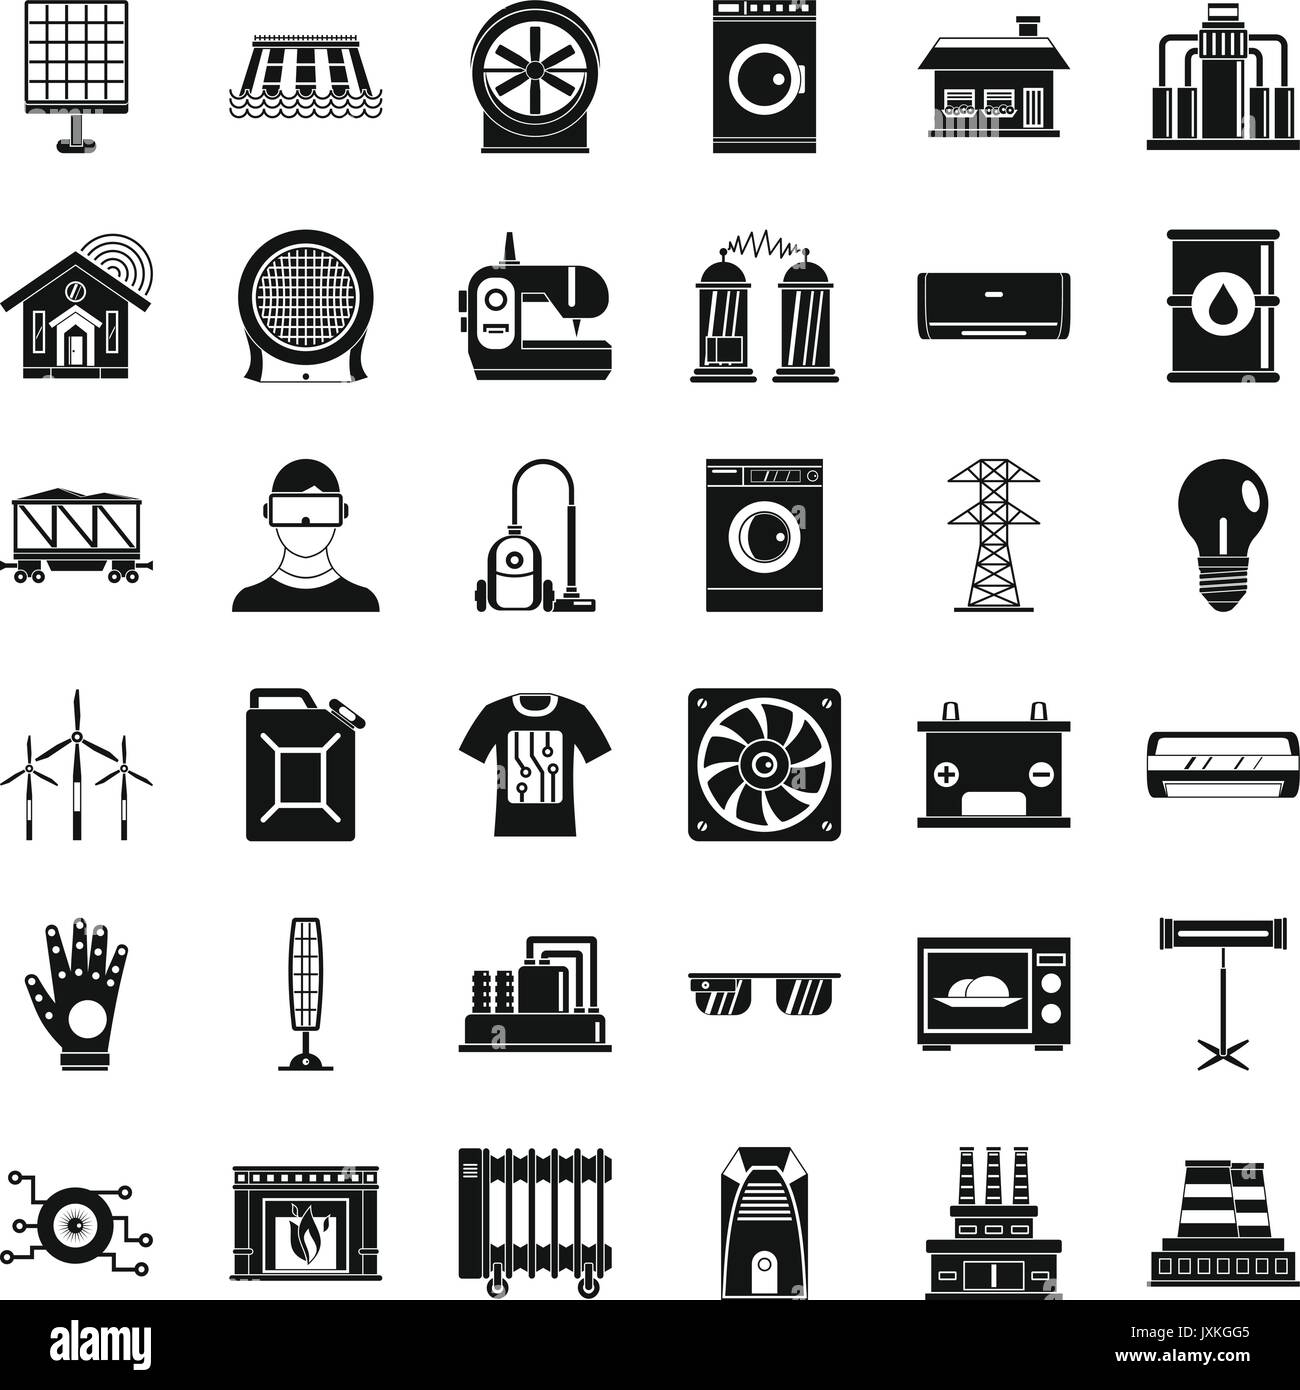 Electrical engineering icons set, simple style Stock Vector